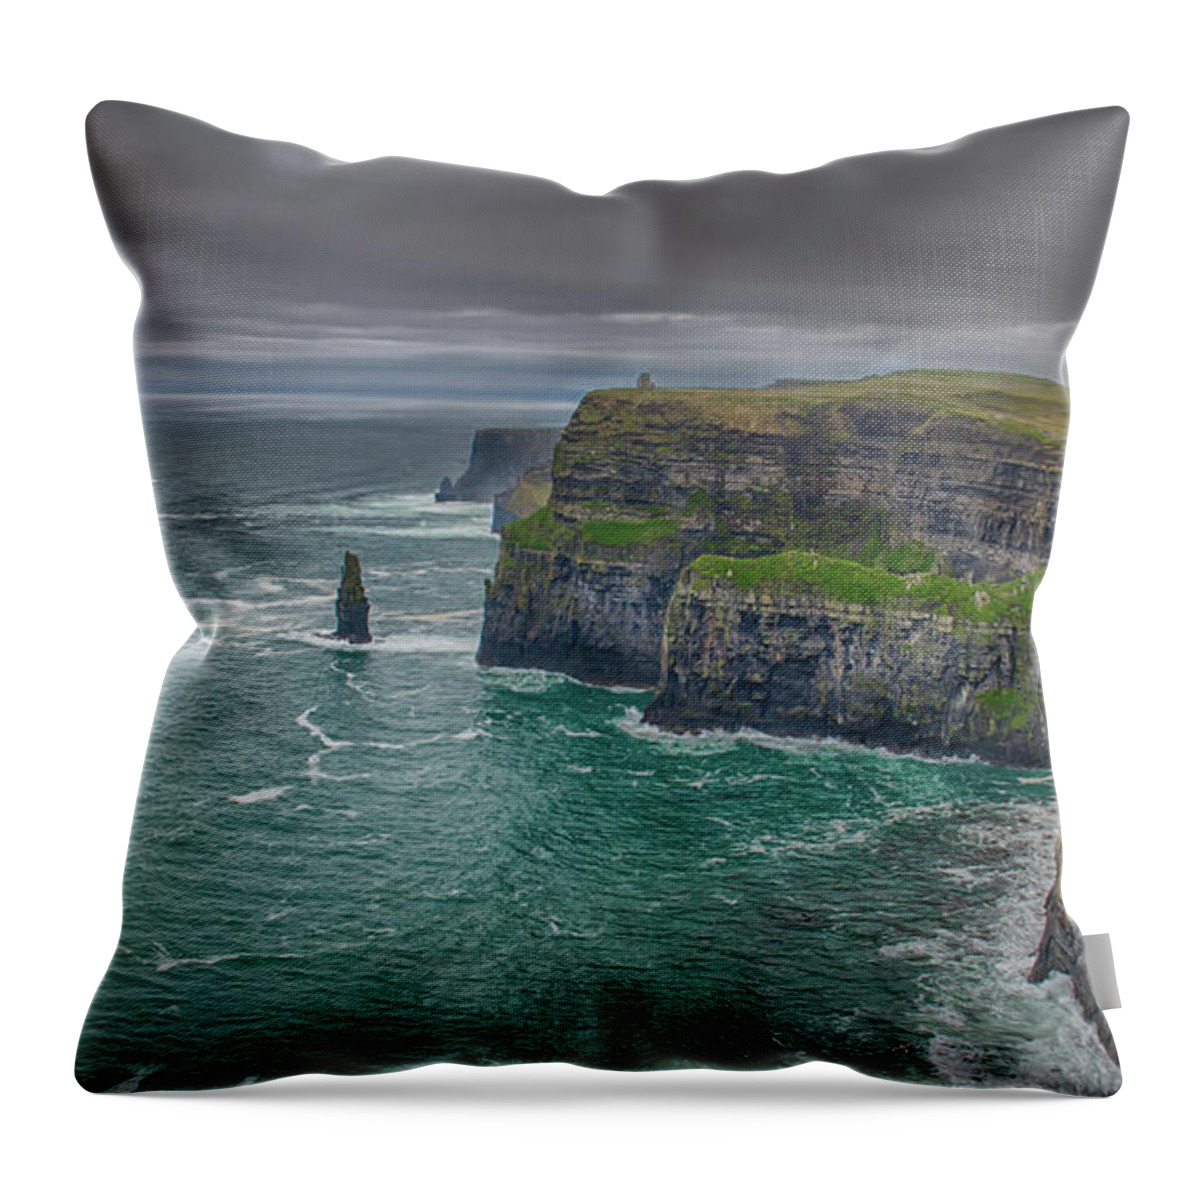 Tranquility Throw Pillow featuring the photograph Cliffs Of Moher by Insight Imaging